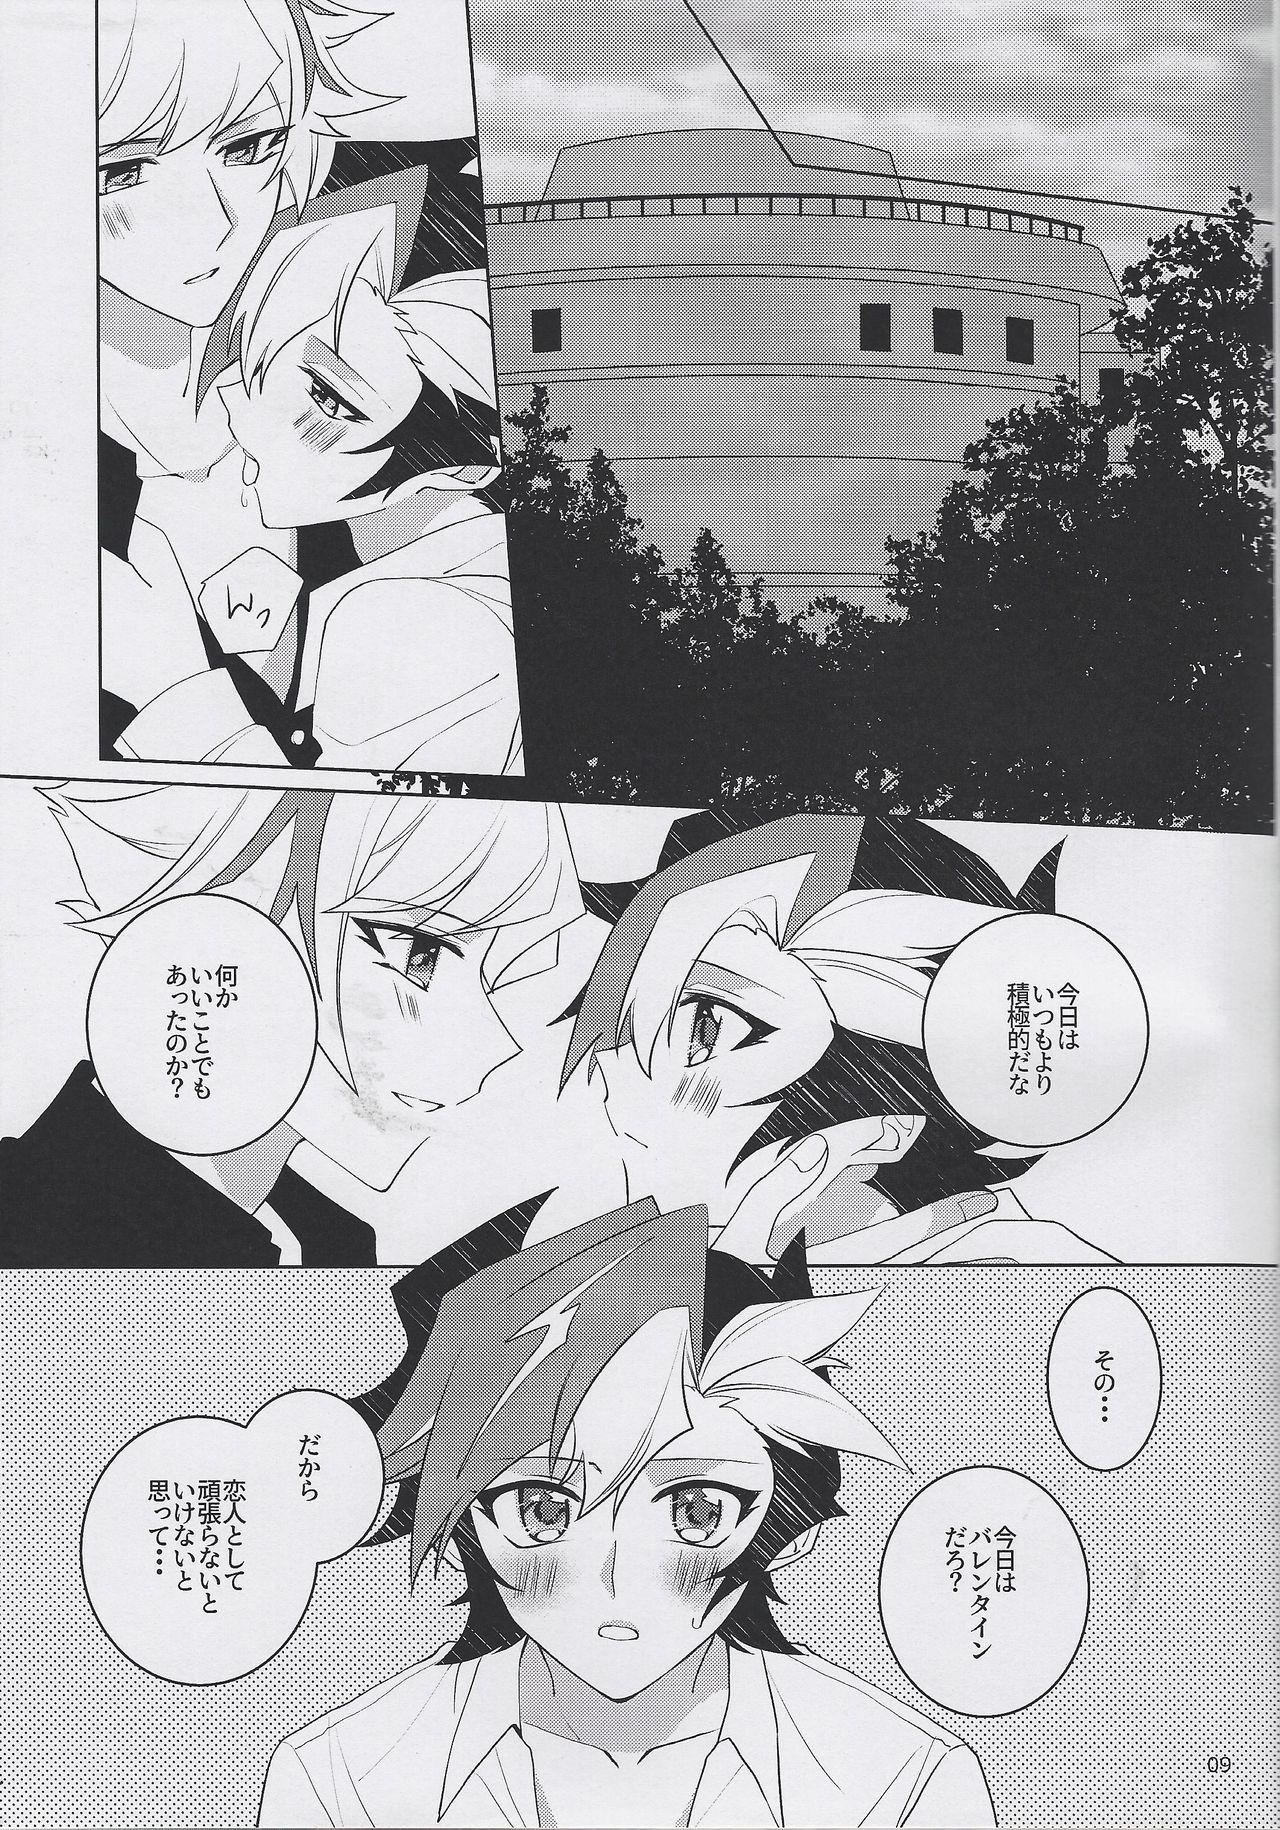 Hot Cunt Unmei no Melty Choco - Yu gi oh vrains Nudity - Page 8